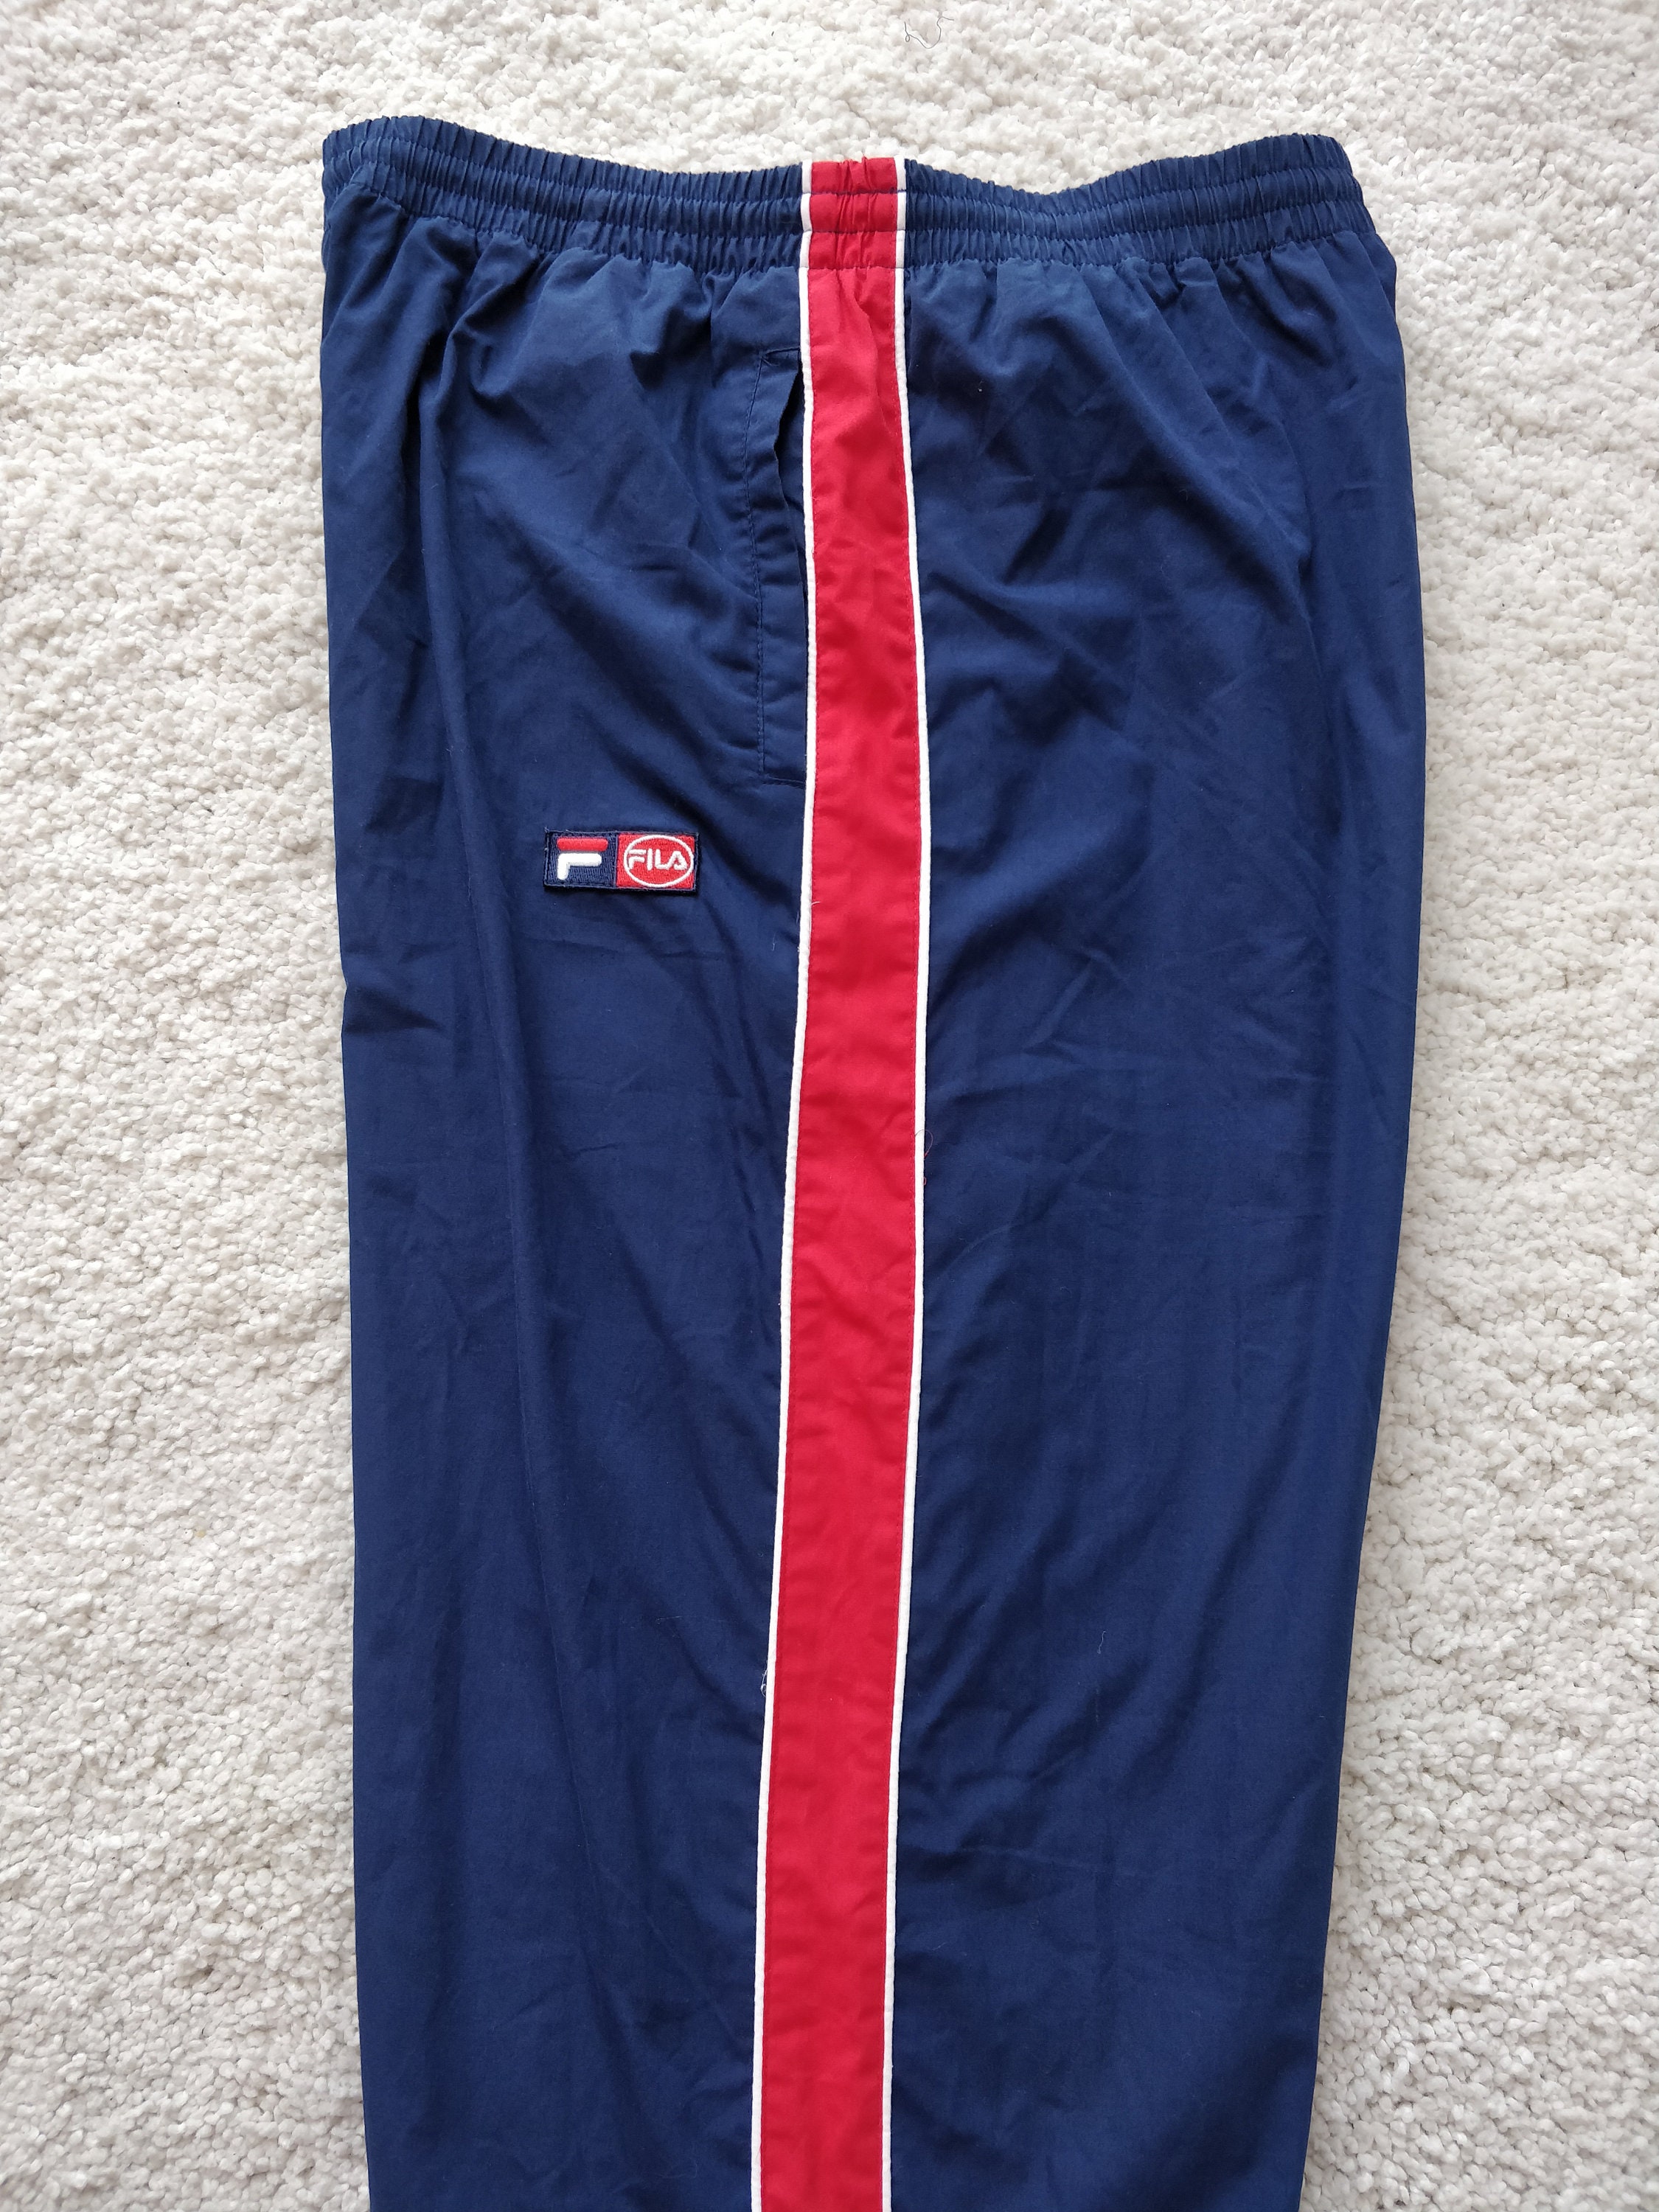 FILA 90's Vintage Mens Track Pants Trousers Navy Blue Red | Etsy